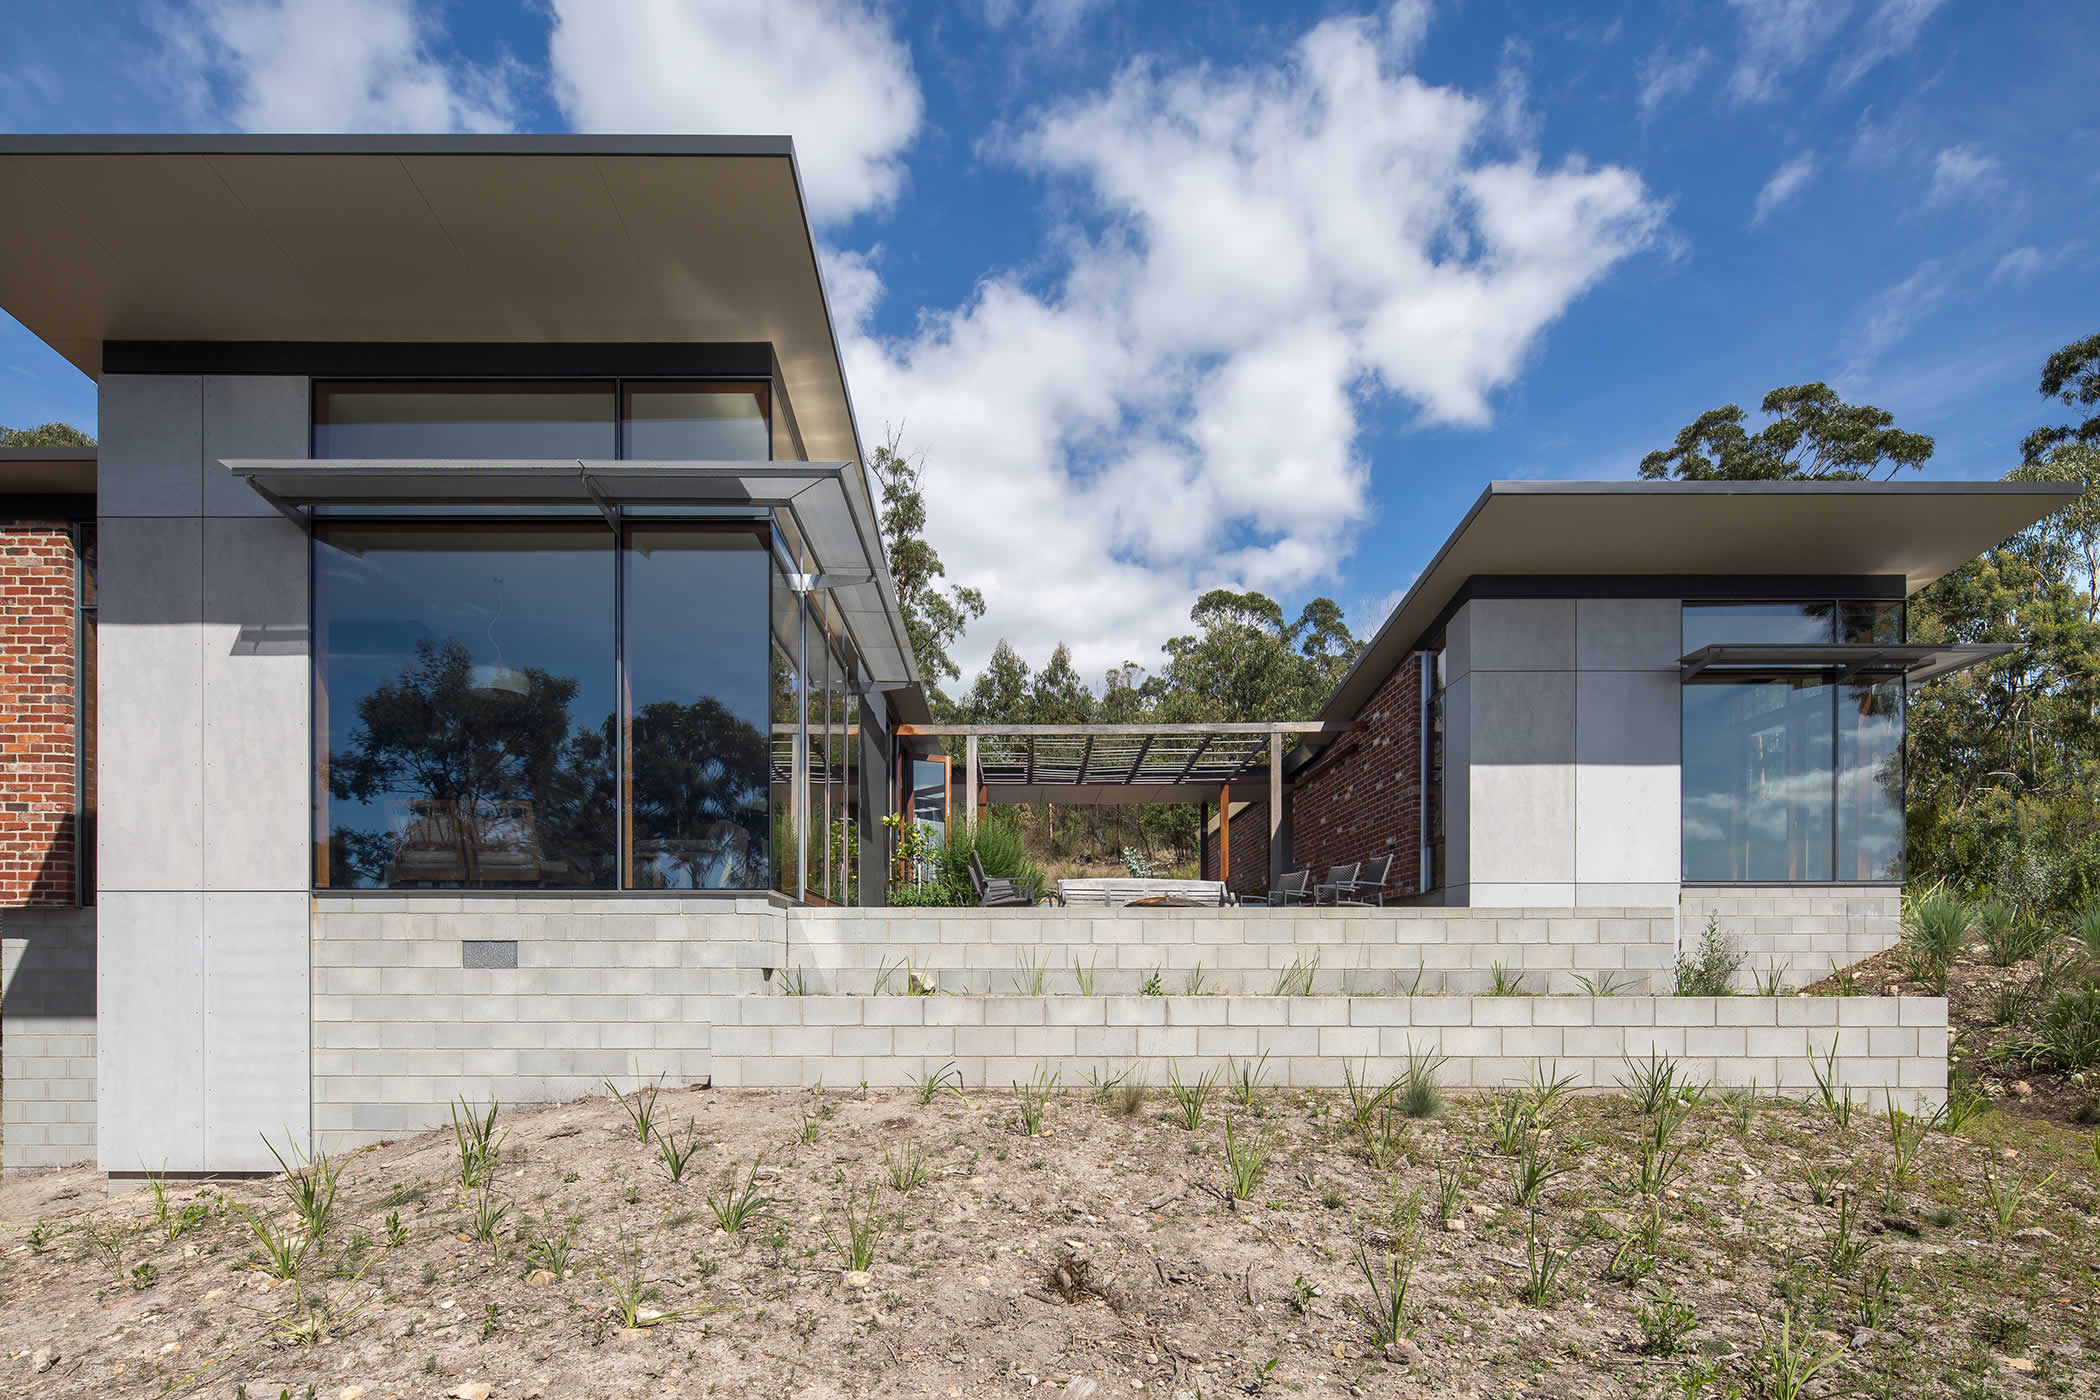 Sandy Bay, Tasmania: External courtyards link the two pavilions. They create inside–outside space, shelter from wind and weather, frame spectacular water views, and define the limits of encroachment in the bush. Photo by Thomas Ryan.